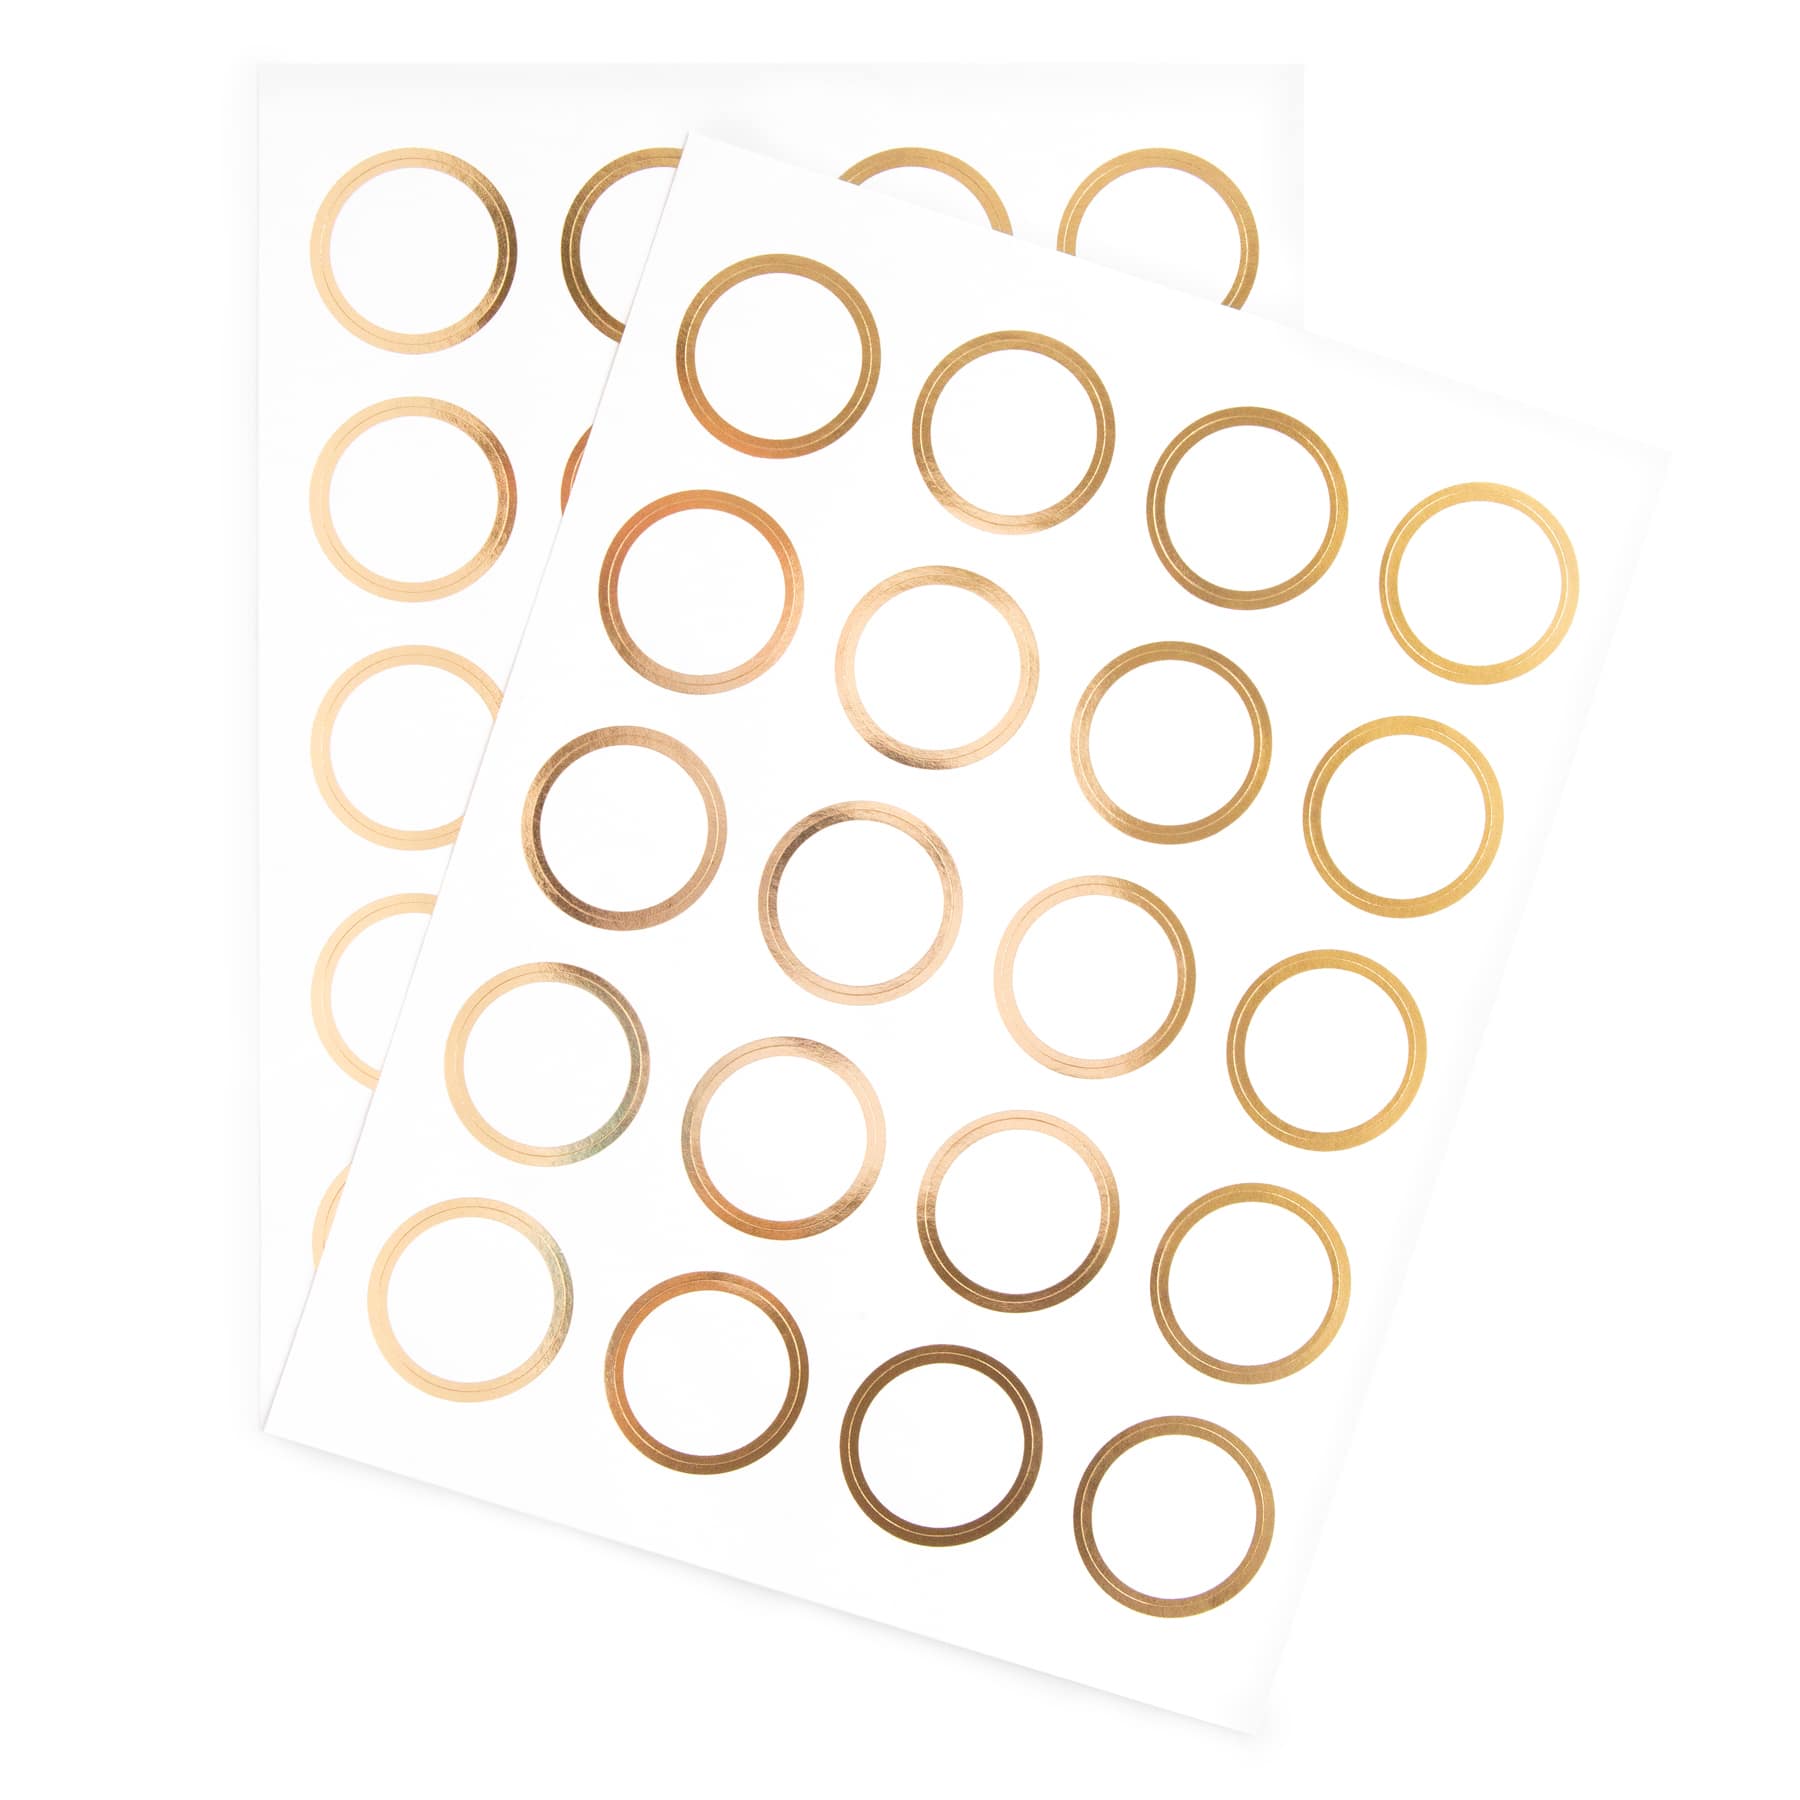  You Are Invited Envelope Seals- 60 clear Stickers for